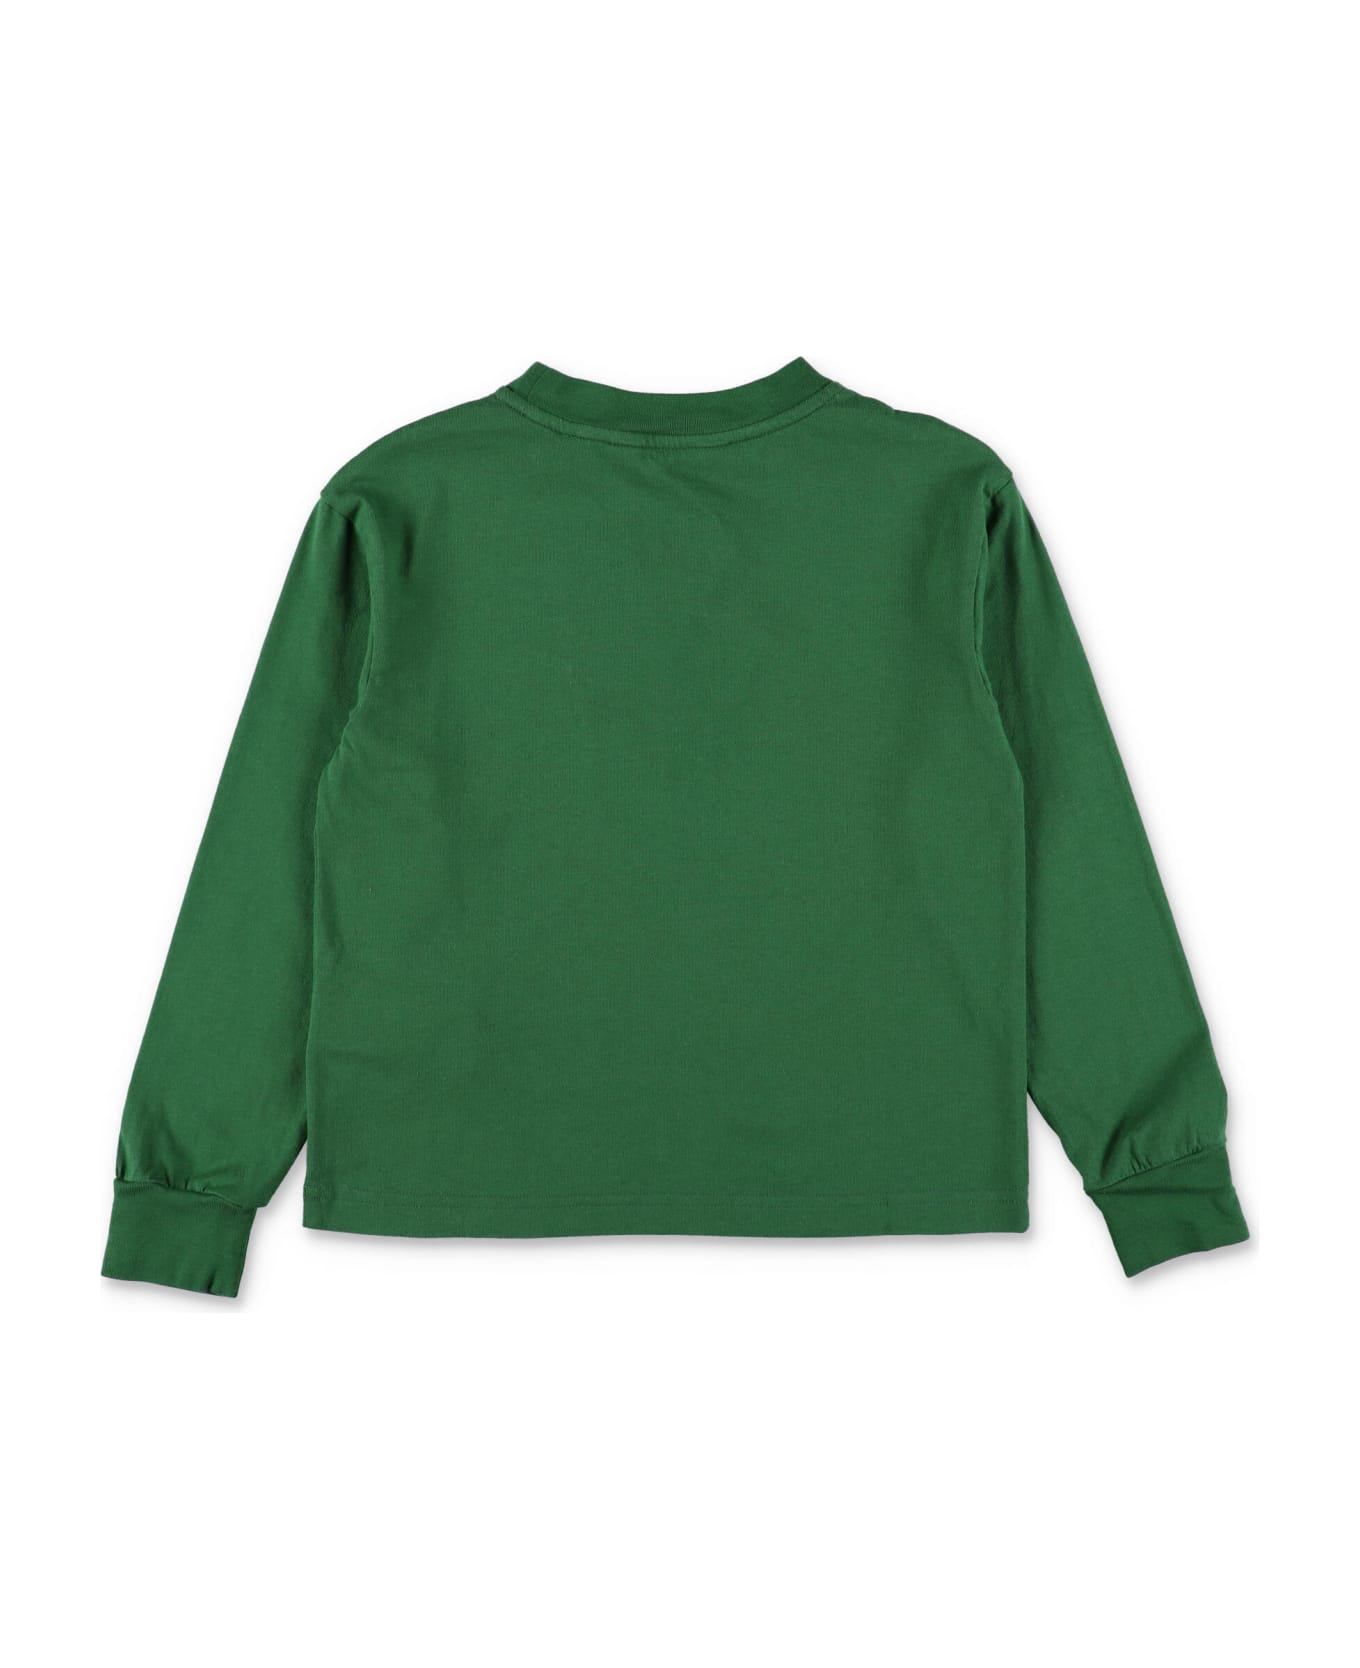 Palm Angels T-shirt Verde In Jersey Di Cotone Bambino - Verde